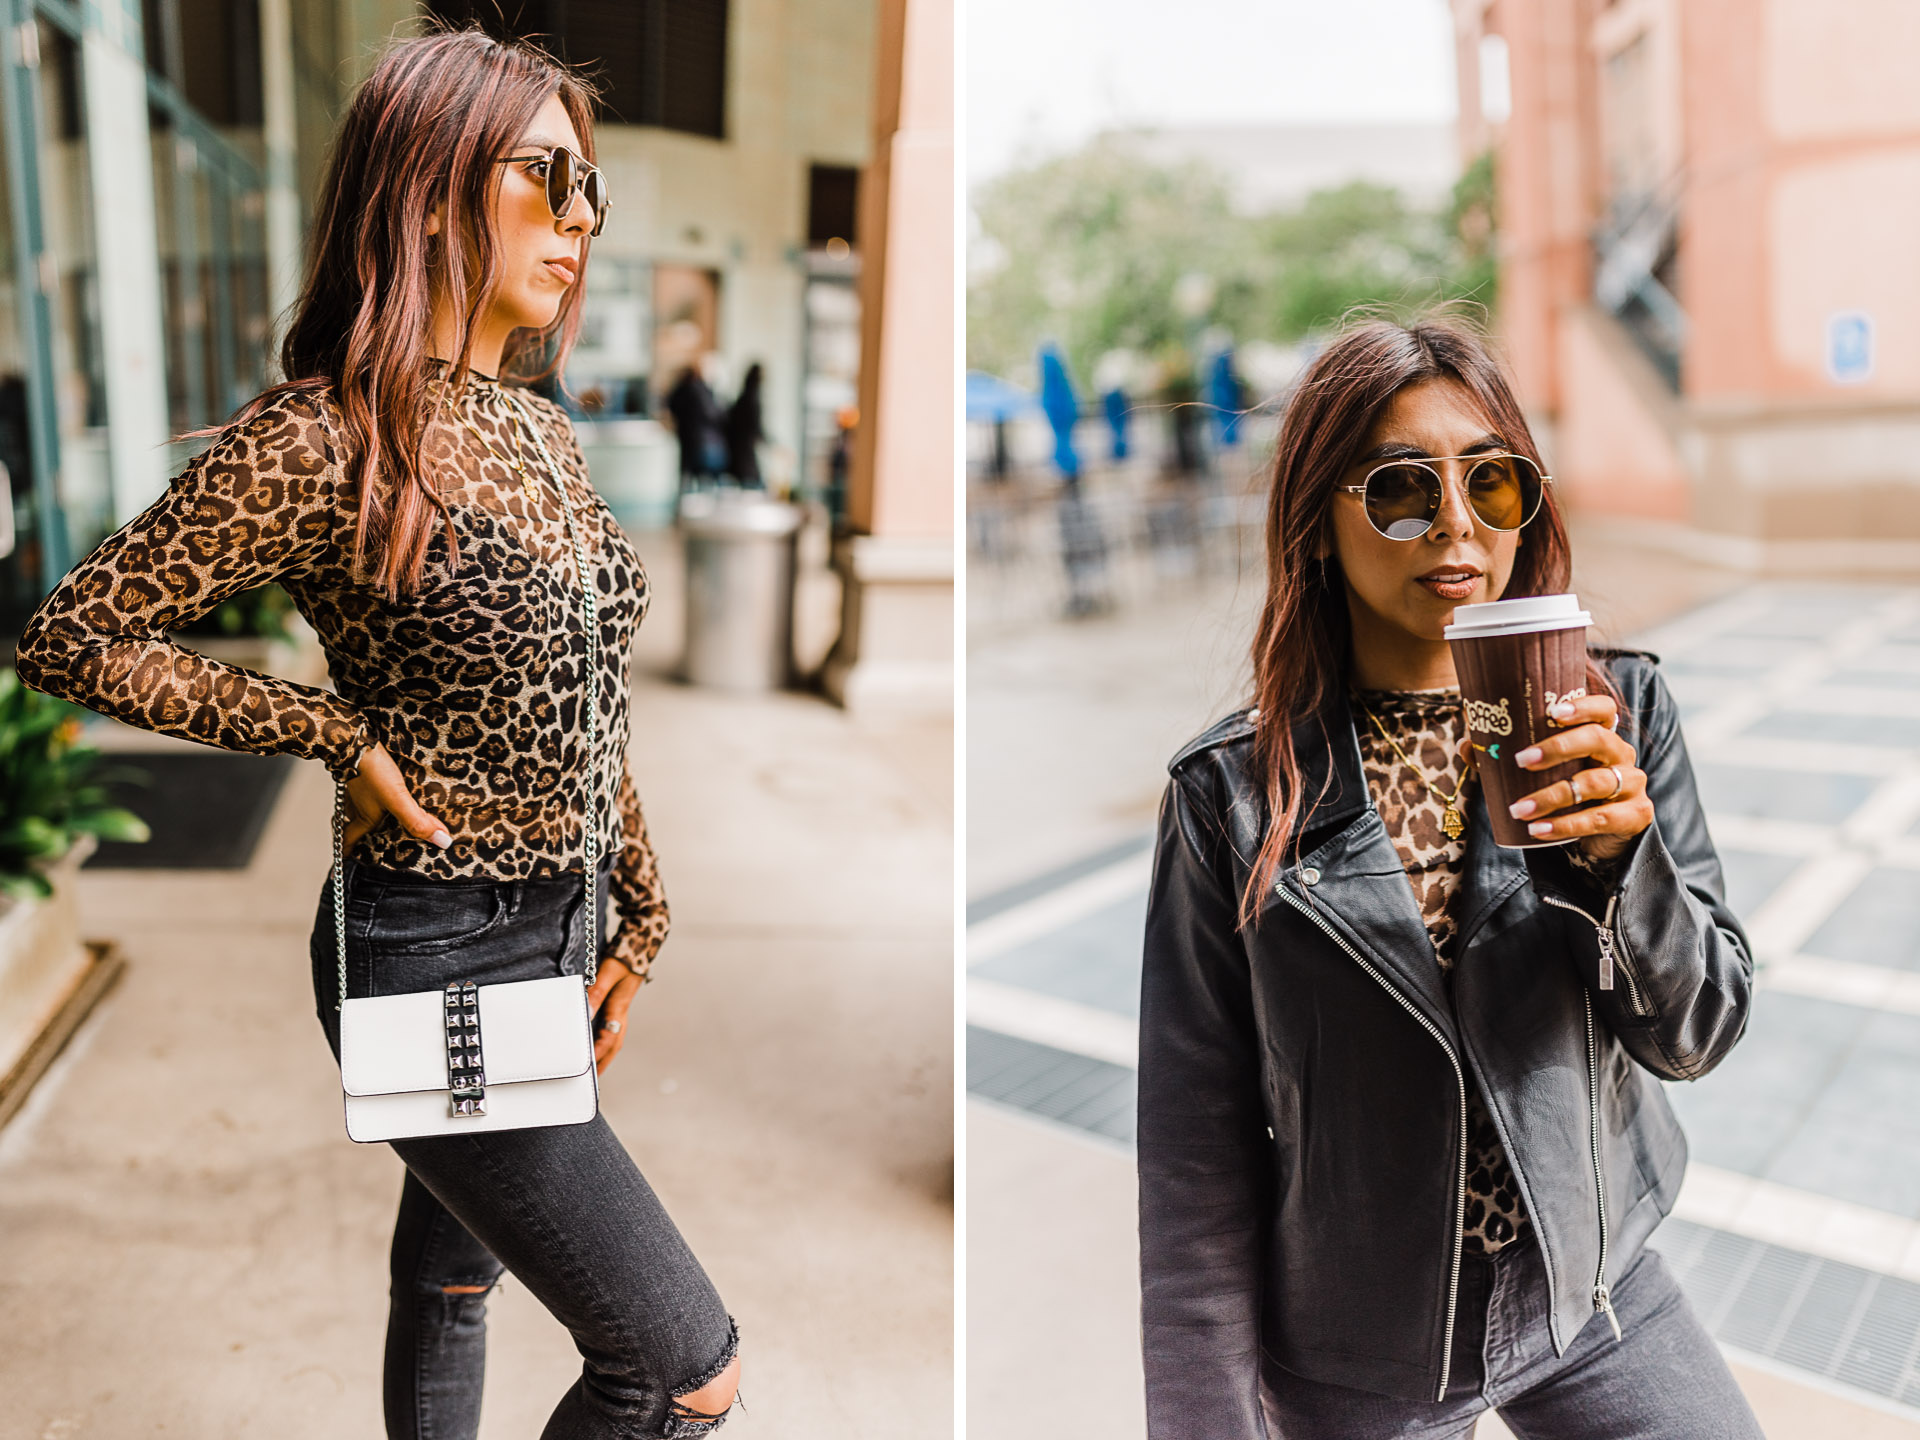 Fashion blogger holding a Philz coffee cup wearing a cheetah print shirt, ripped black jeans, and white sneakers.